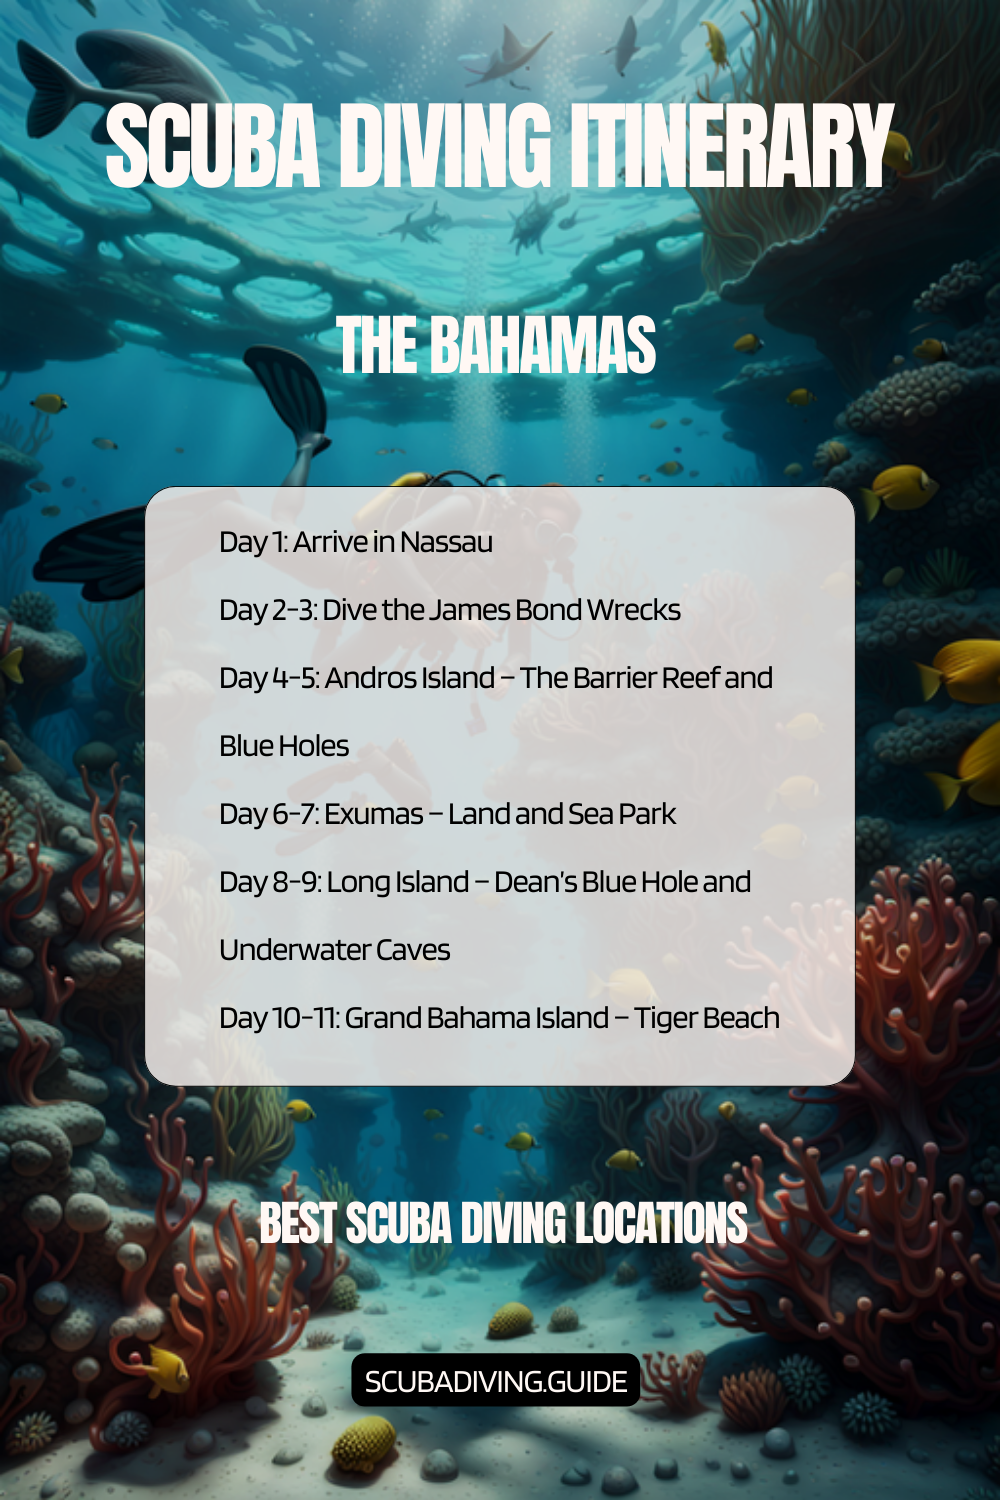 The Bahamas Recommended Scuba Diving Itinerary